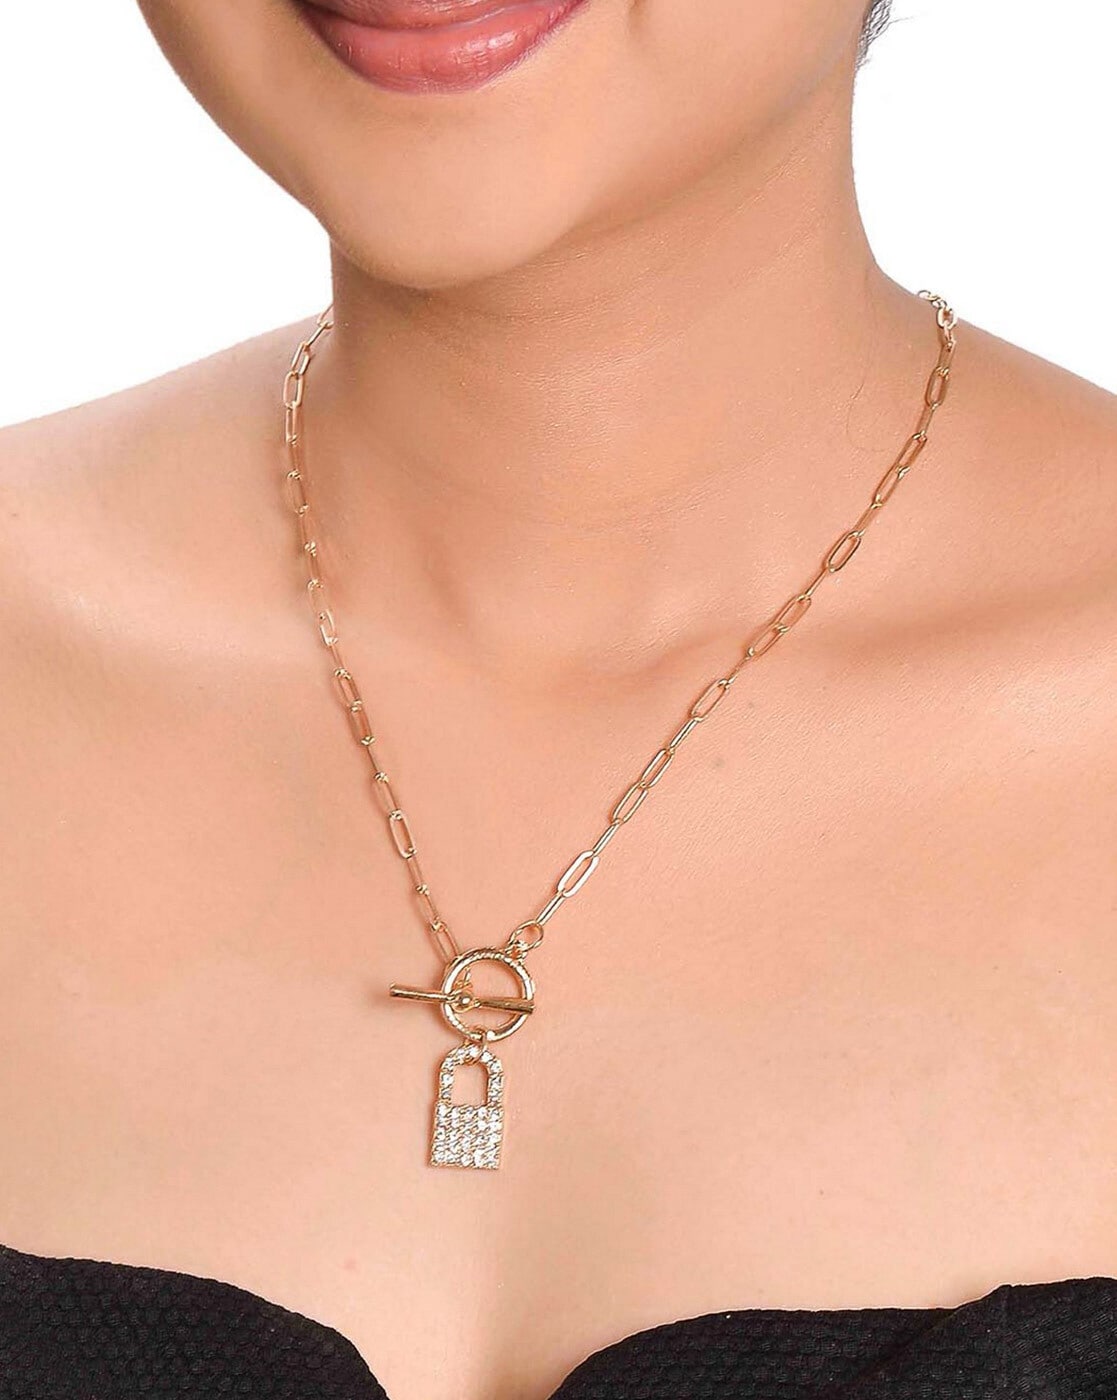 14k Gold and Diamond Charms Necklace - Zoe Lev Jewelry